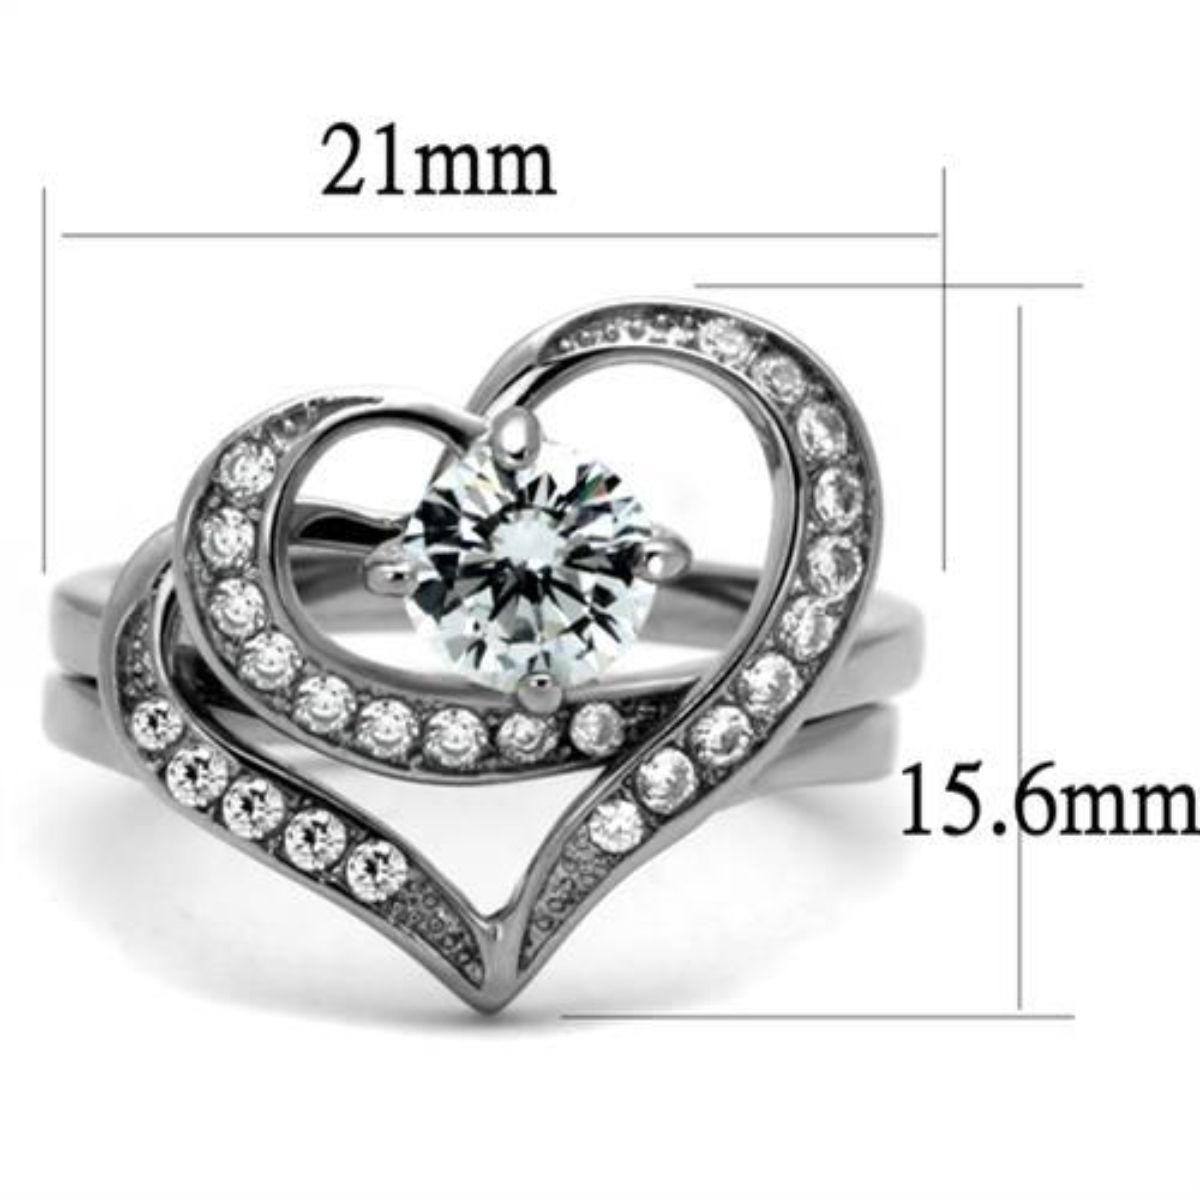 Luxe Jewelry Designs Set of 2 Women's Stainless Steel Heart Shaped Rings with Round CZ Stones, Size 9